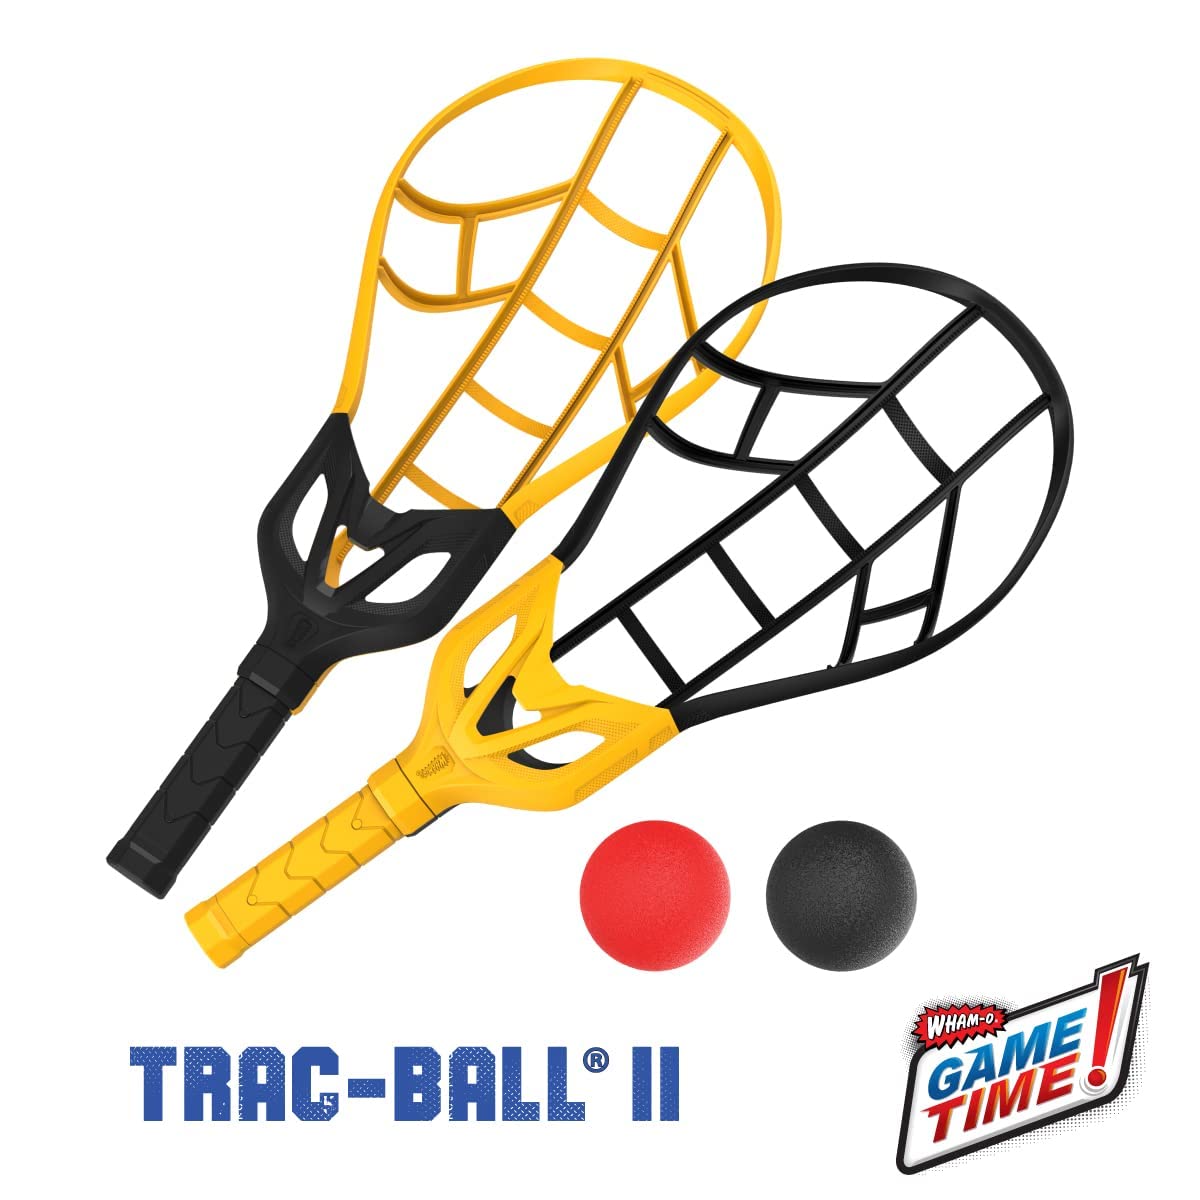 Wham-O Game Time Trac-Ball |2 Rackets & 2 Air Action Balls | Outdoor Play for Kids & Adults of All Ages | Original Tracball & Other Outdoor Games